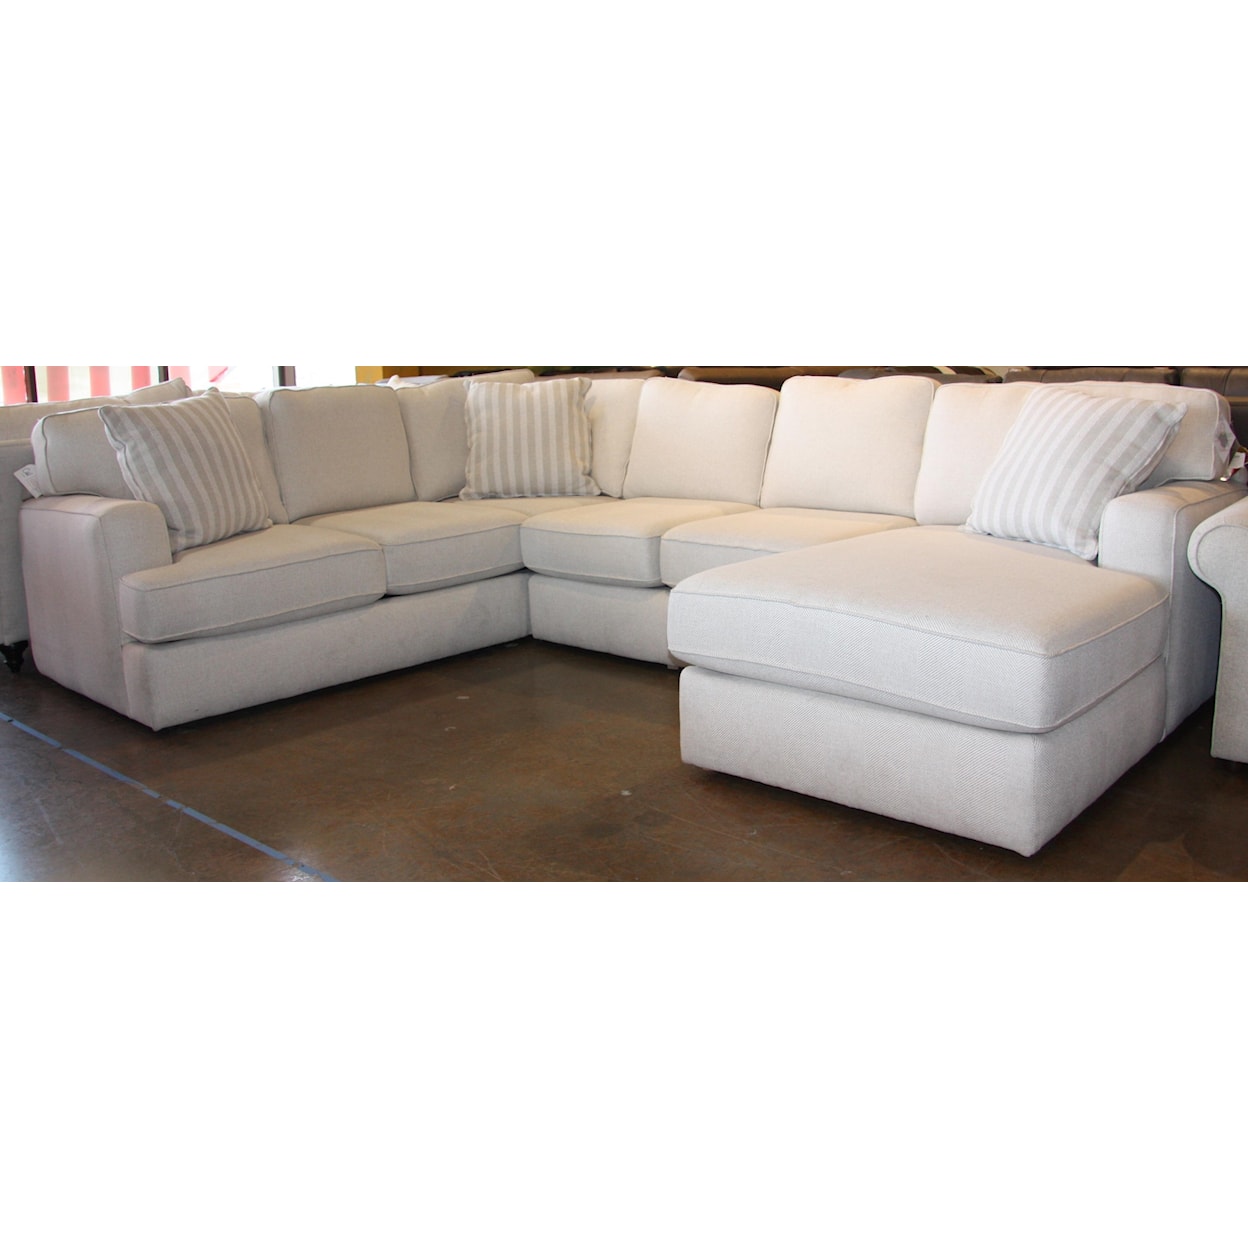 England Rouse 3 PC Sectional